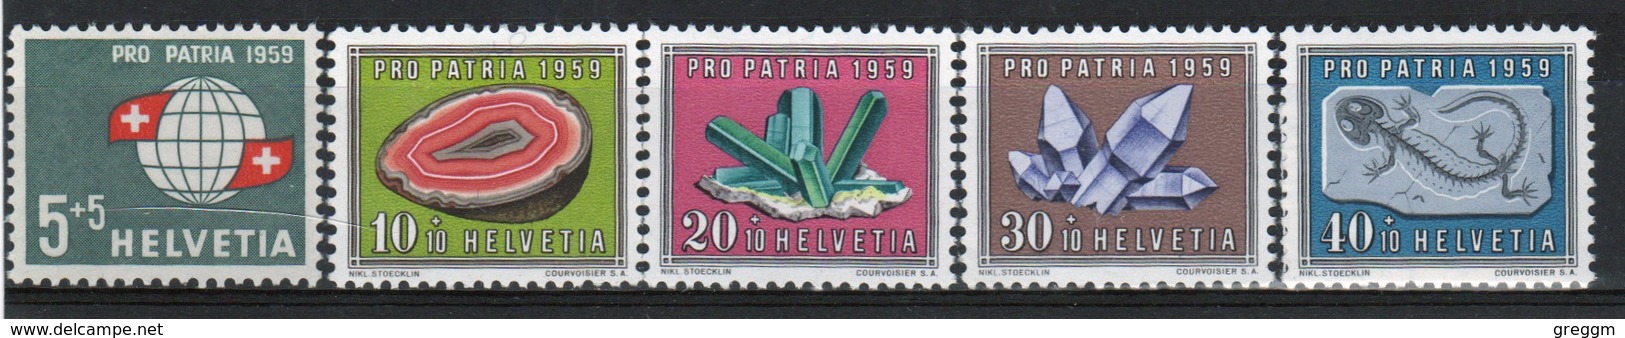 Switzerland 1954 Pro Patria Set Of Stamps Issued To Commemorate Swiss Citizens. - Unused Stamps